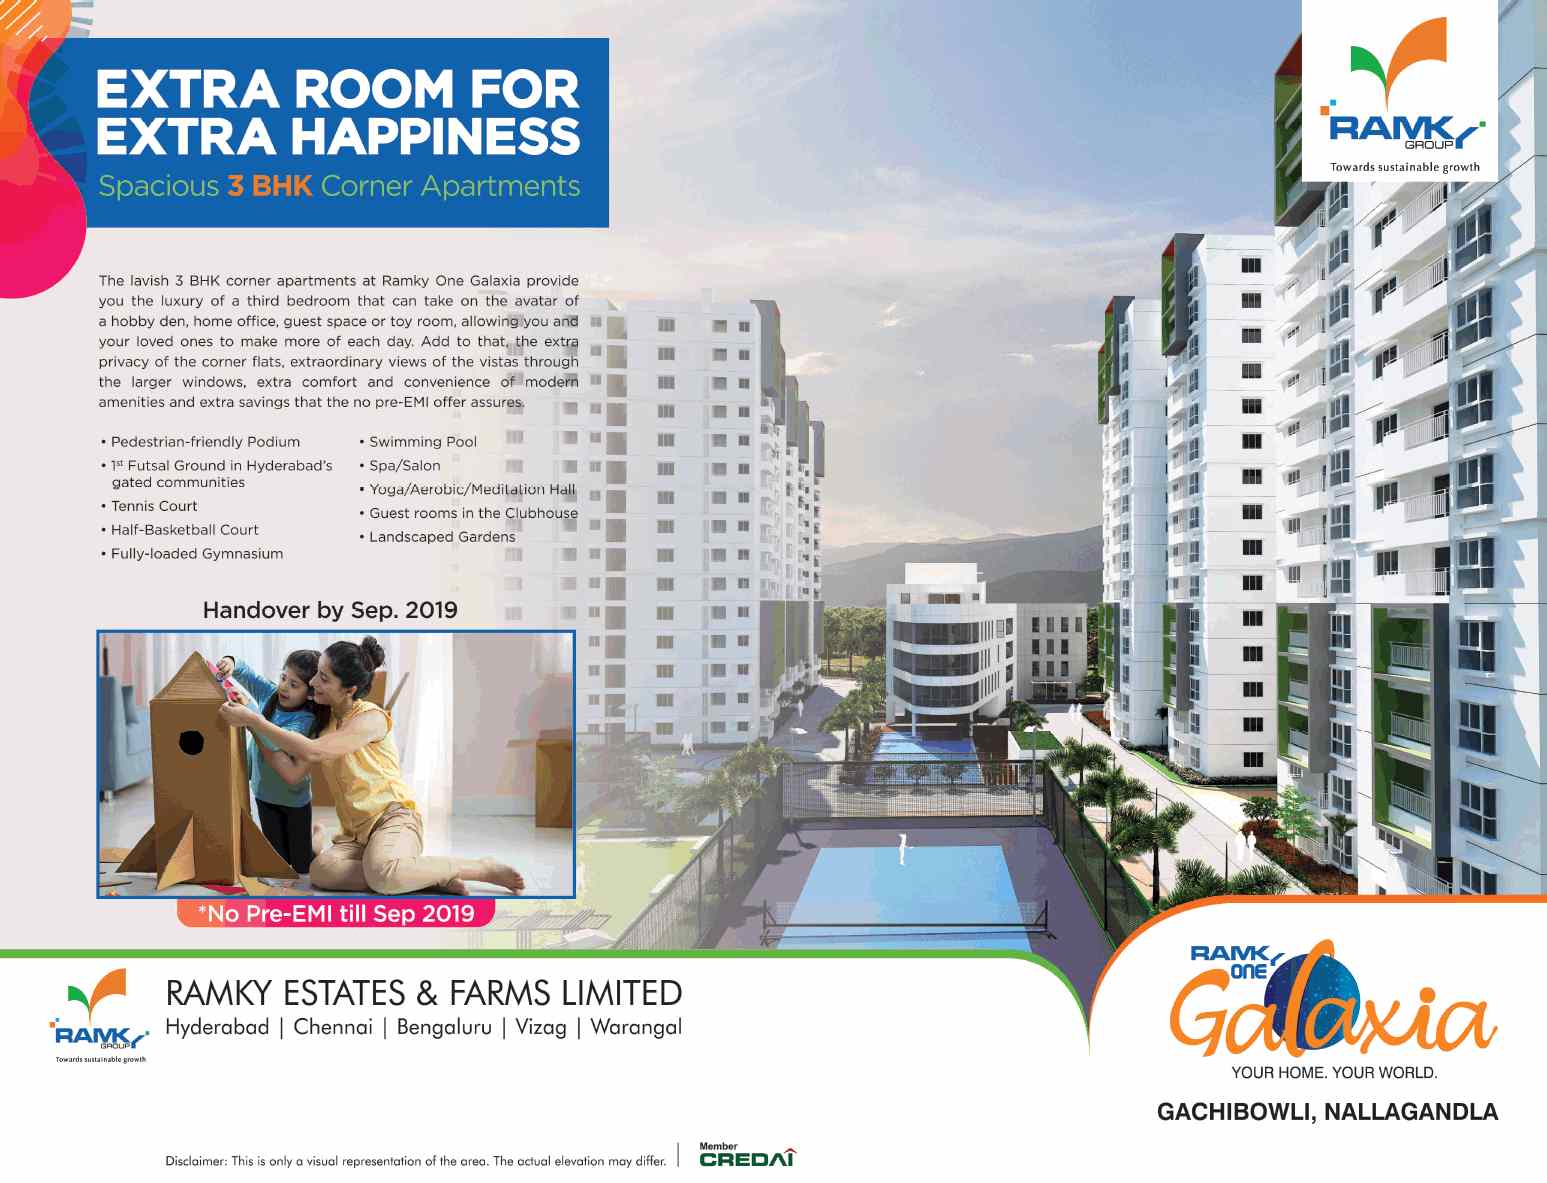 Book lavish 3 BHK corner apartments at Ramky One Galaxia in Hyderabad Update